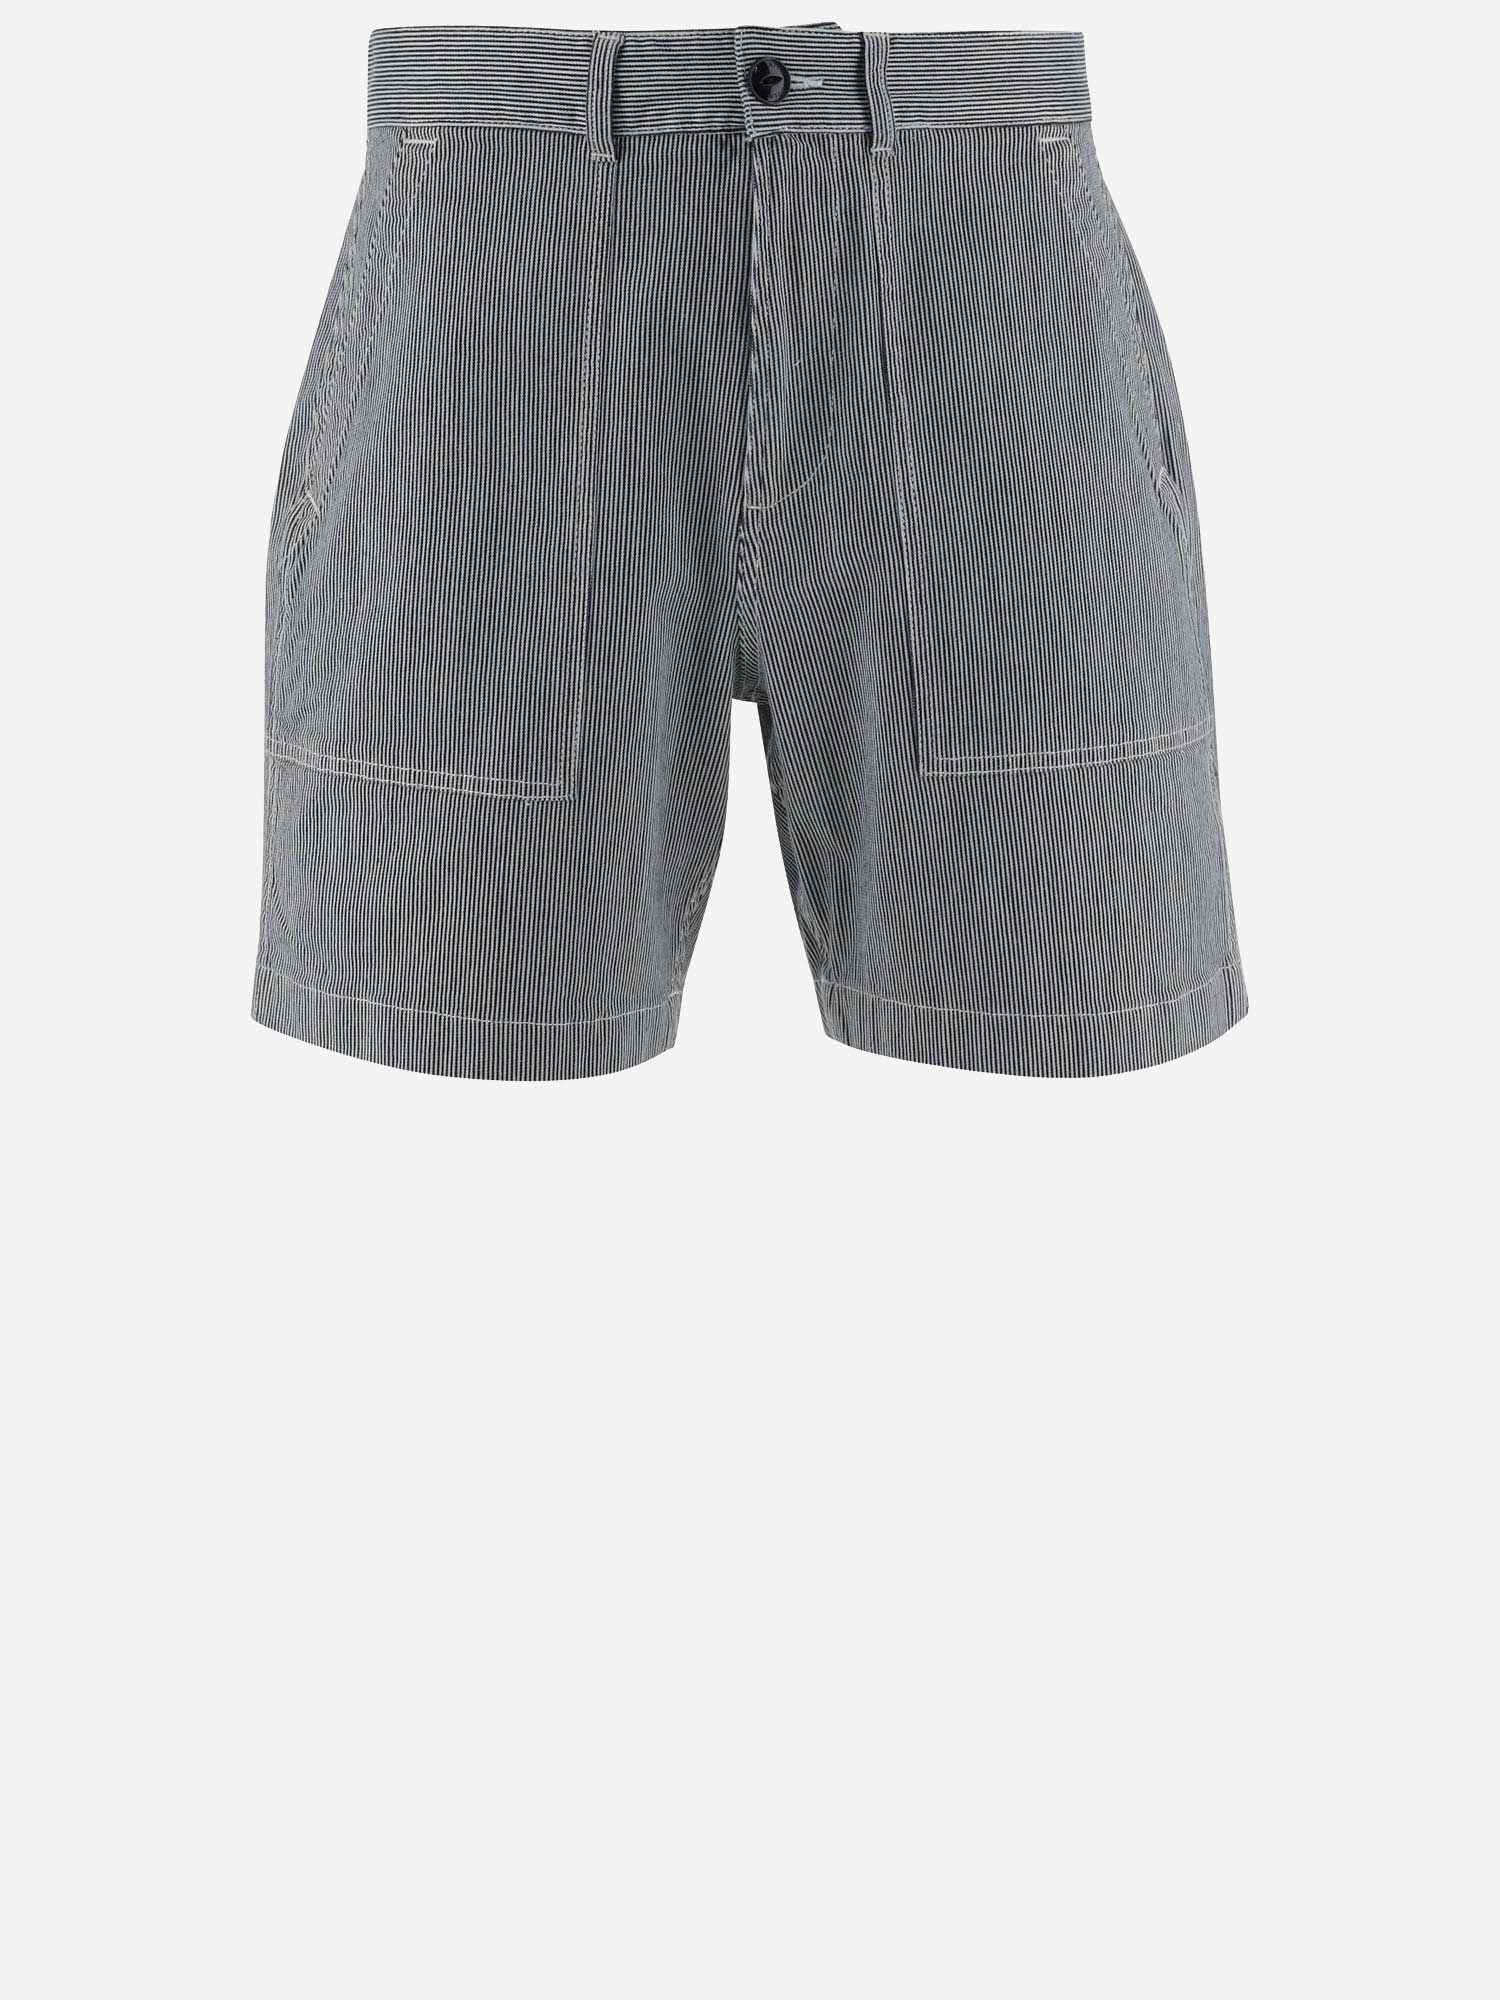 Stretch Cotton Short Pants With Striped Pattern